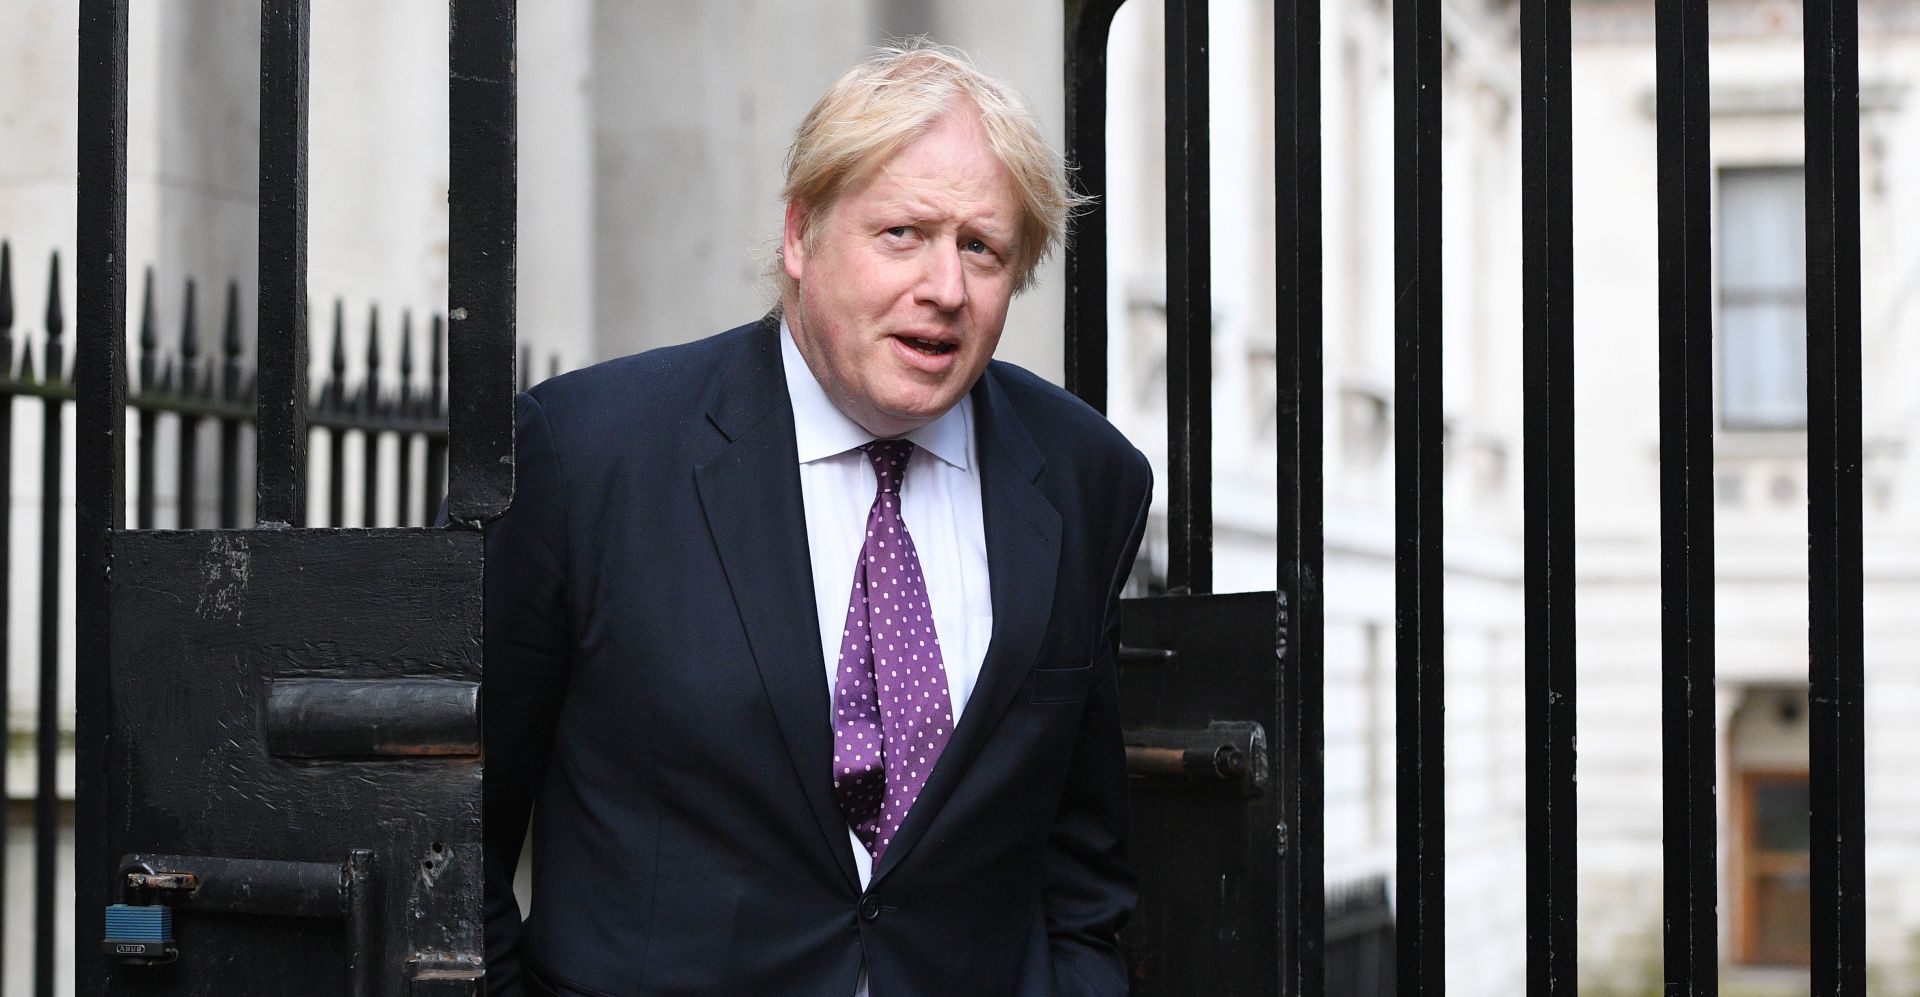 epa05896756 (FILE) - A file photograph showing British Foreign Secretary Boris Johnson, arriving in 10 Downing Street for a cabinet meeting in central London, Britain, 29 March 2017. Foreign Secretary Boris Johnson has issued a statement on 08 April 2017 stating the he has decided not to visit Moscow as planned on 10 April 2017. Johnson said, 'Developments in Syria have changed the situation fundamentally. My priority is now to continue contact with the US and others in the run up to the G7 meeting on 10-11 April - to build coordinated international support for a ceasefire on the ground and an intensified political process. I will be working to arrange for other like-minded partners to meet and explore next steps soon too.' 'I discussed these plans in detail with Secretary Tillerson. He will visit Moscow as planned and, following the G7 meeting, will be able to deliver that clear and co-ordinated message to the Russians.'  EPA/FACUNDO ARRIZABALAGA